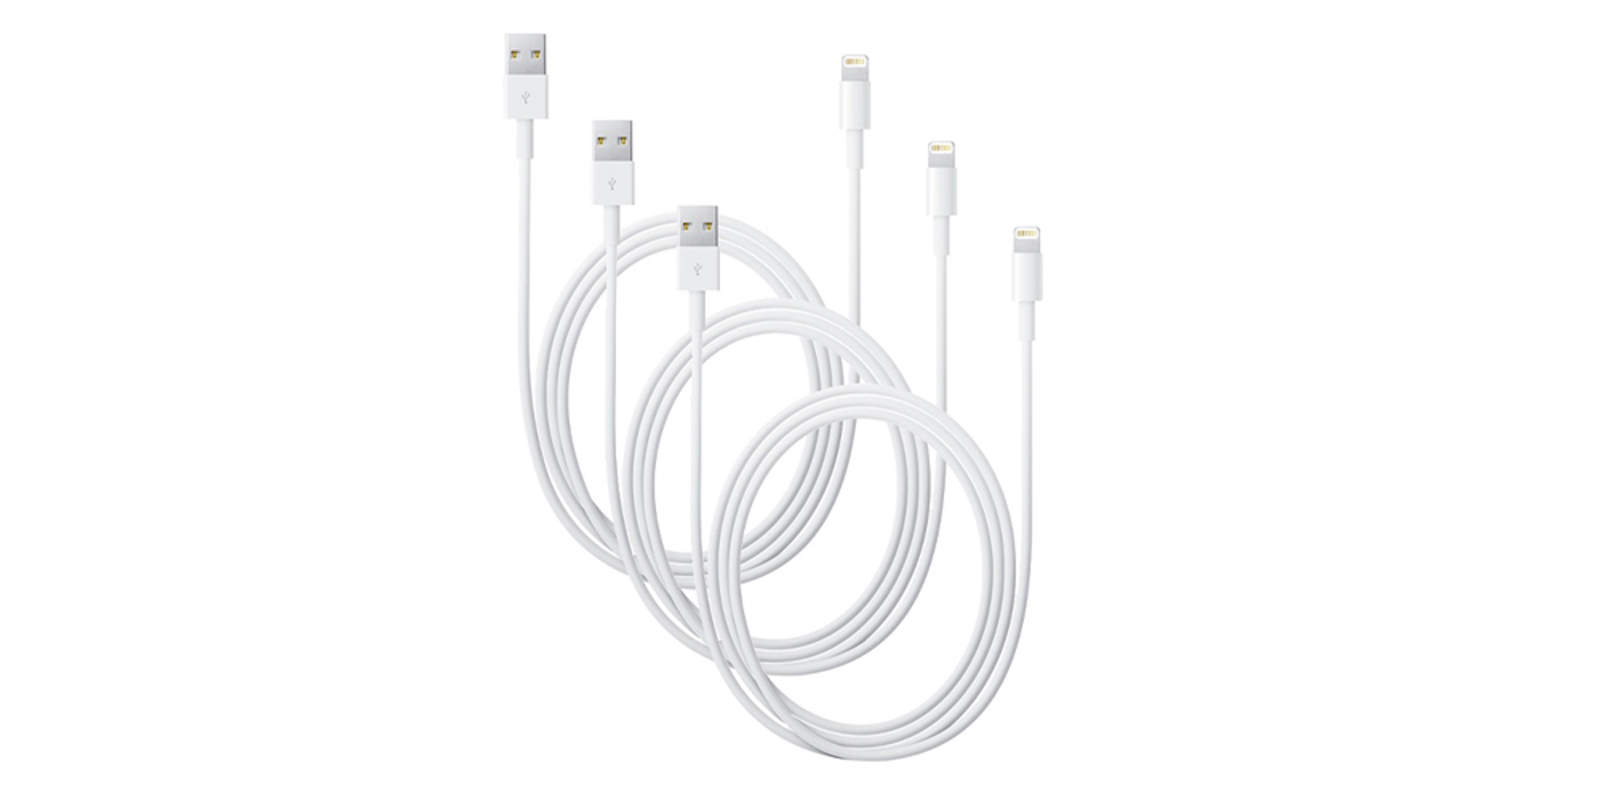 Get these 3 Apple-certified Lightning cables and make sure you're never without one when you need it.